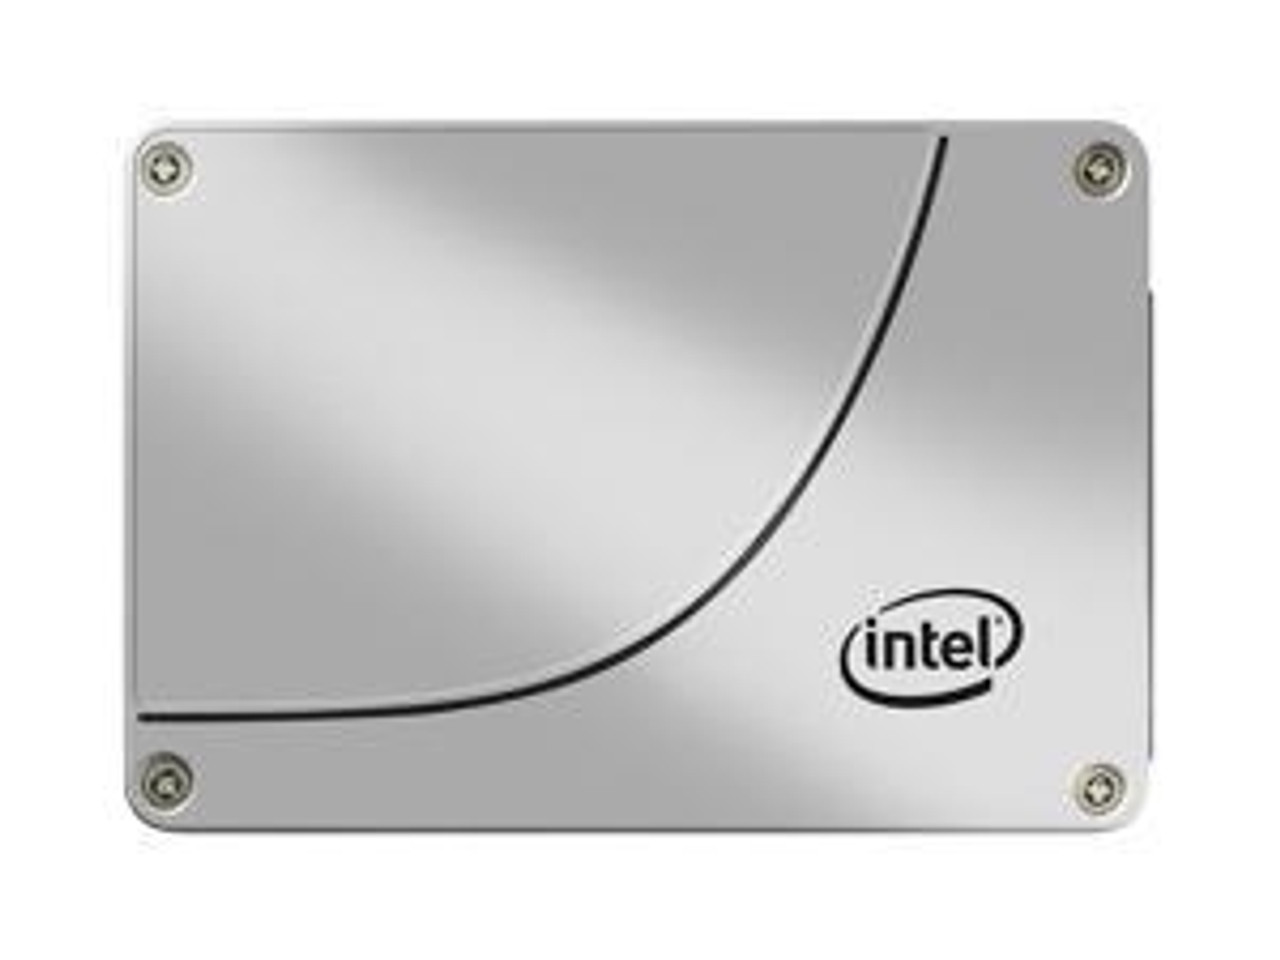 Intel Certified Pre-Owned 320 160 GB Solid State Drive - 2.5" Internal - SATA (SATA/300)